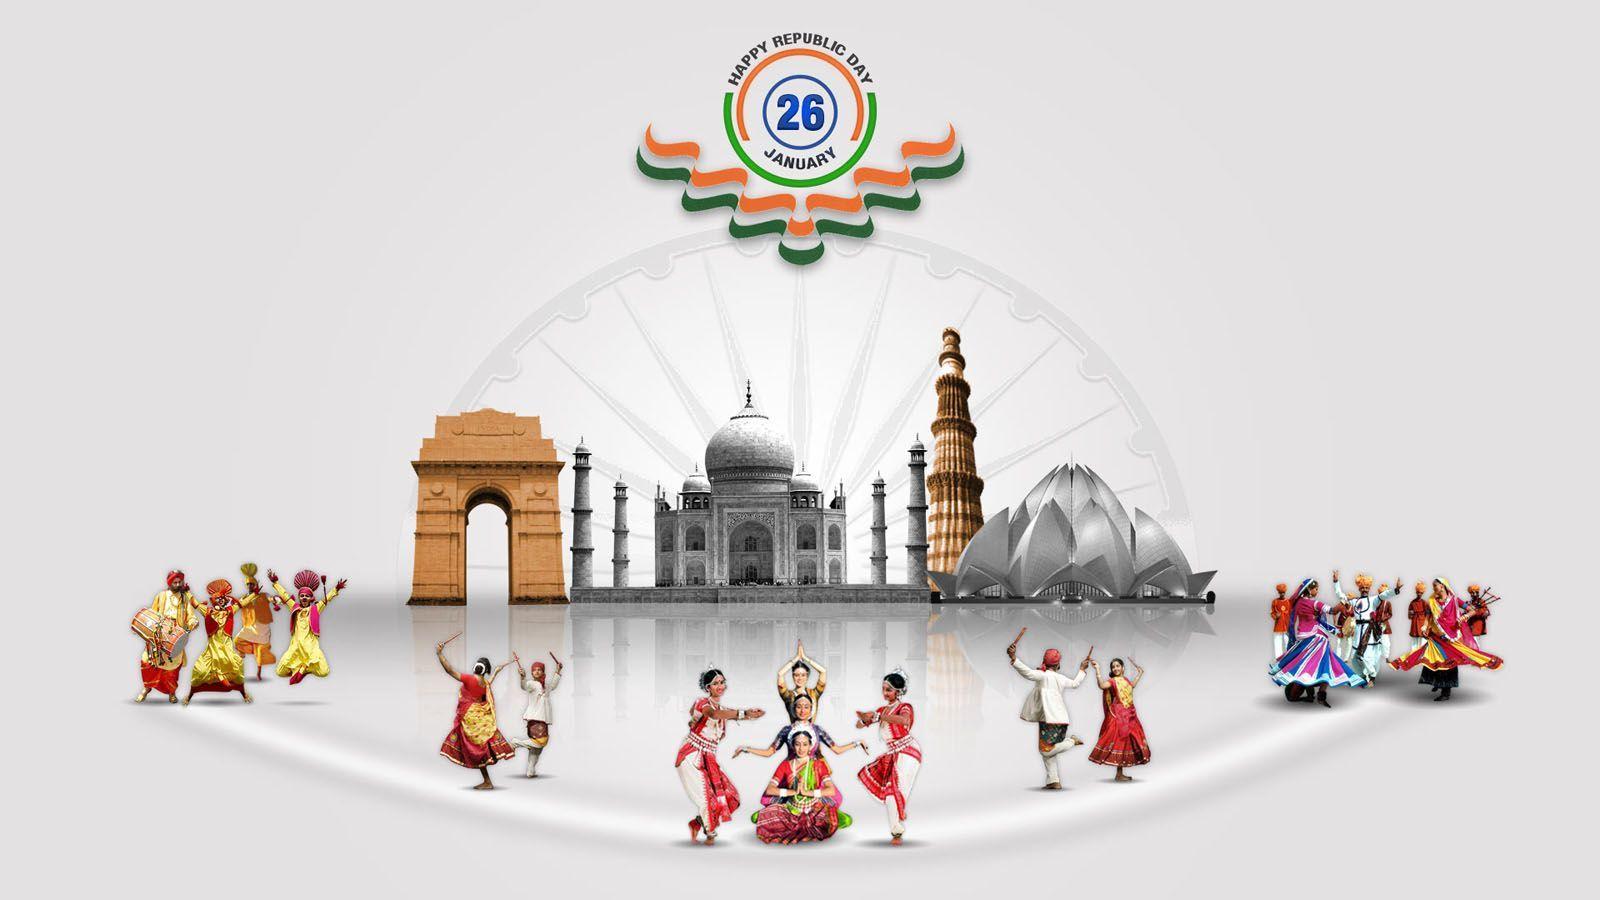 67th Indian Republic Day HD Image Free Download for Whatsapp